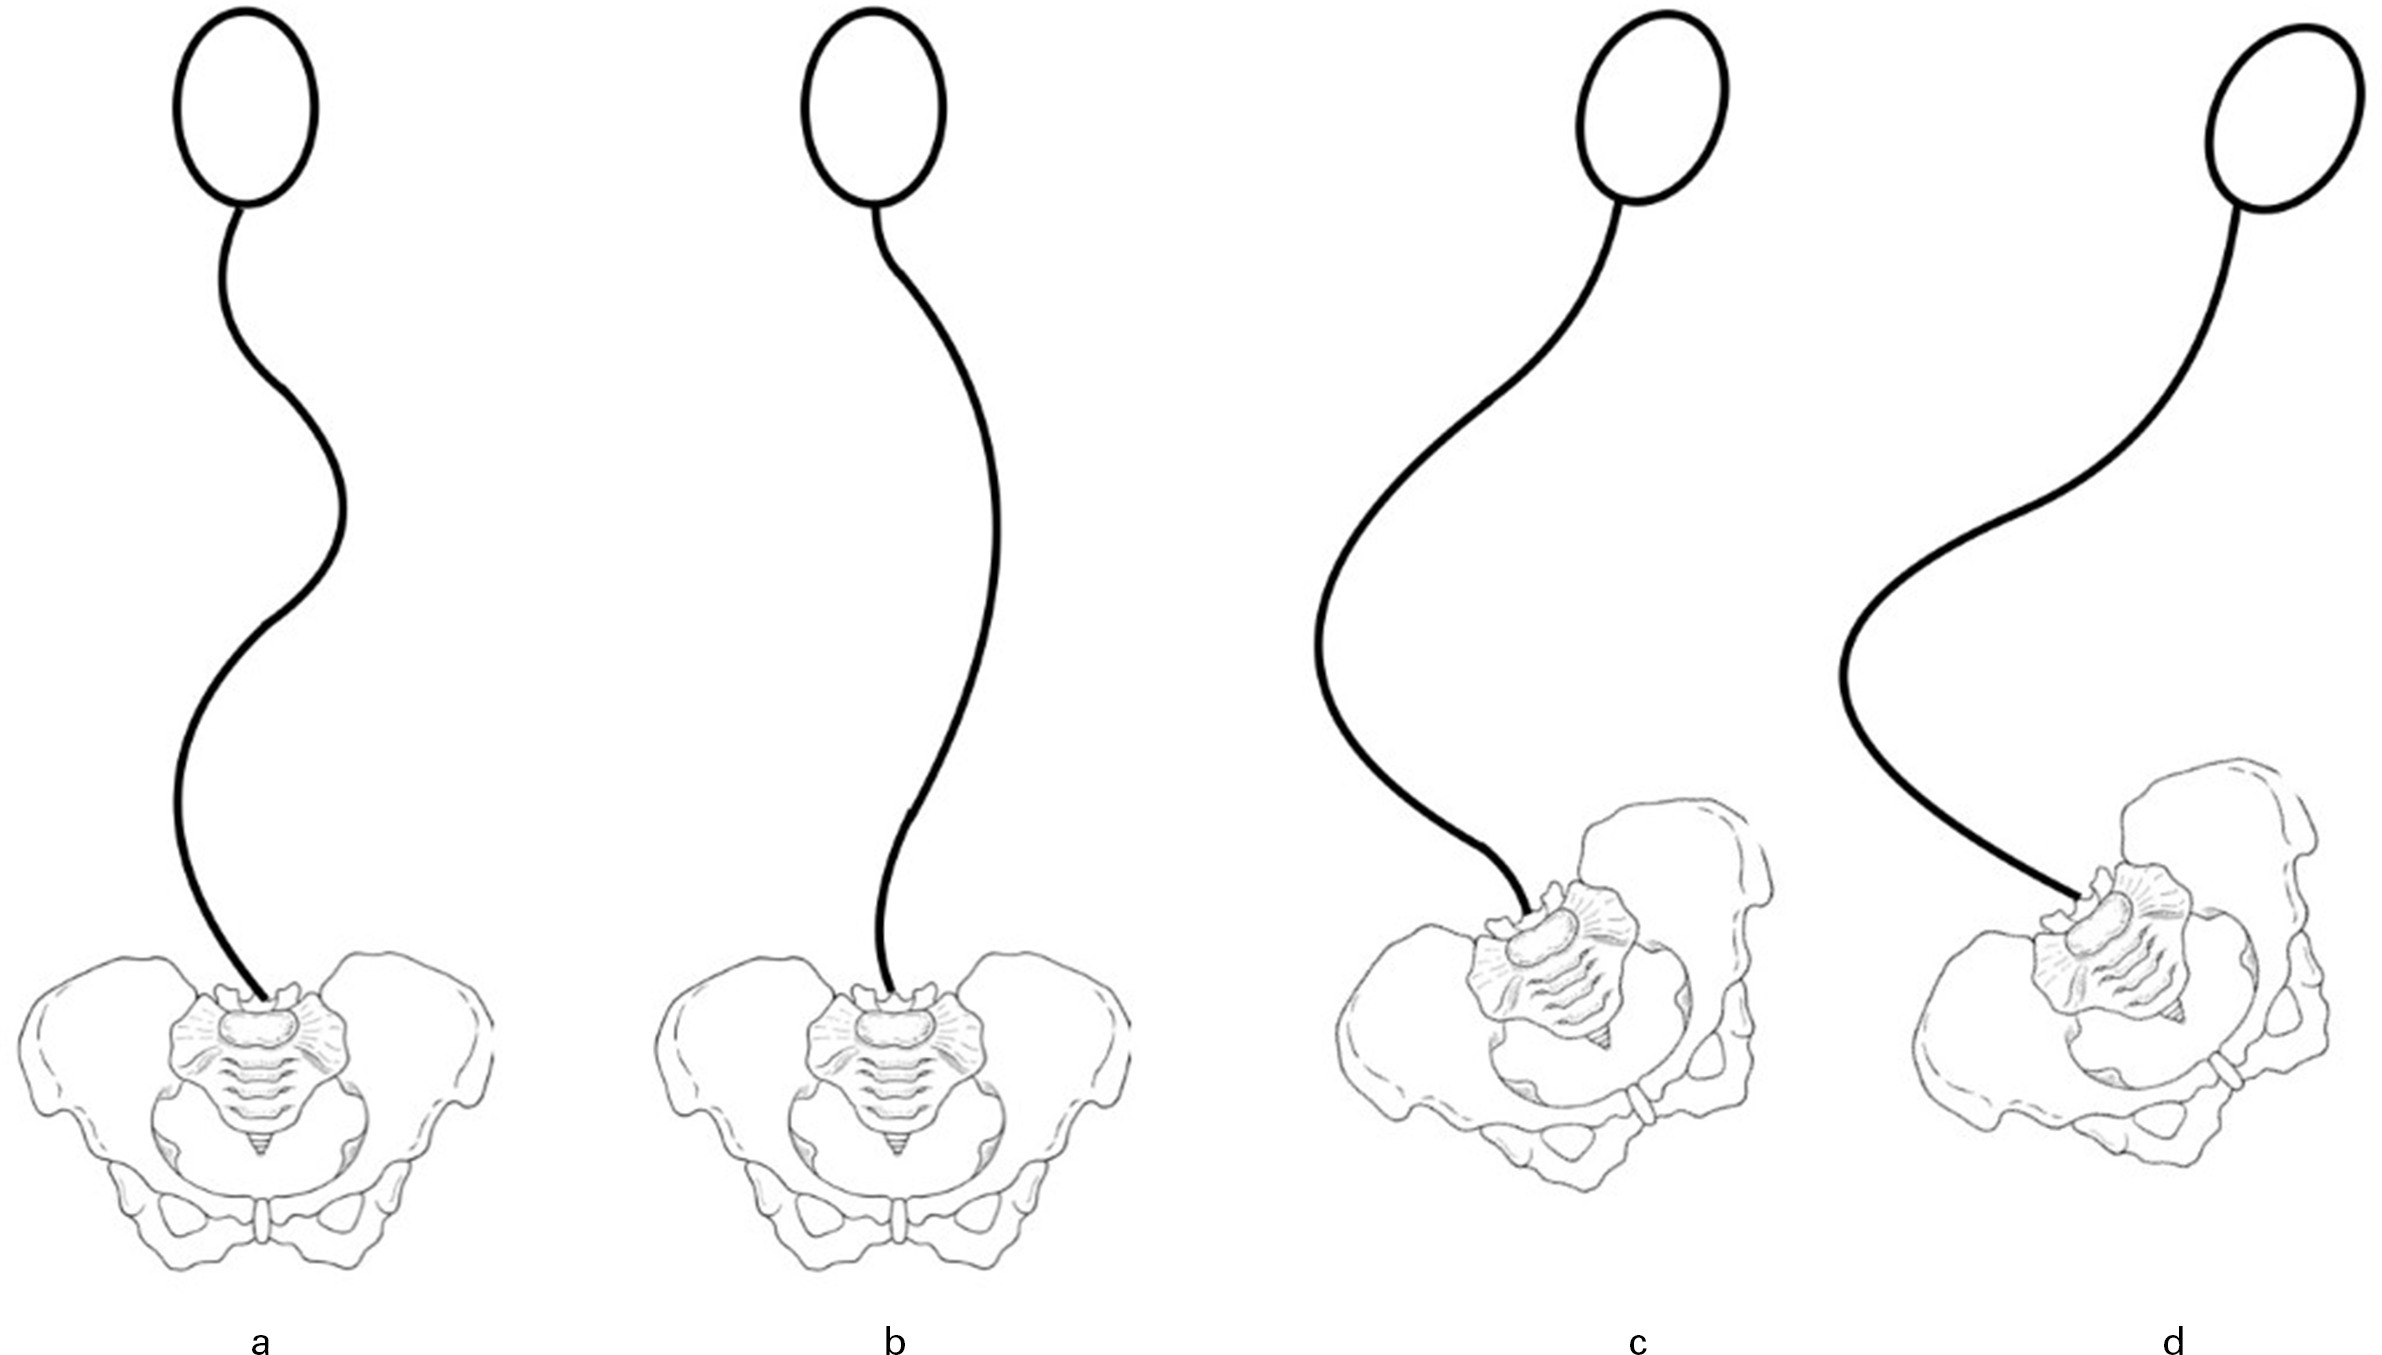 Fig. 2 
            Classification of scoliosis in patients with cerebral palsy. a) Group 1 curves: trunk compensated and presenting as well-balanced double curve. b) Group 1 curves: trunk compensated and presenting as major thoracic curve with small fractional lumbar curve. c) Group 2 curves: decompensated trunk with pelvic obliquity and a small fractional curve between the caudal end of the main curve and the sacrum. d) Group 2 curves: decompensated trunk with pelvic obliquity and the main curve extending distally to include the sacrum.
          